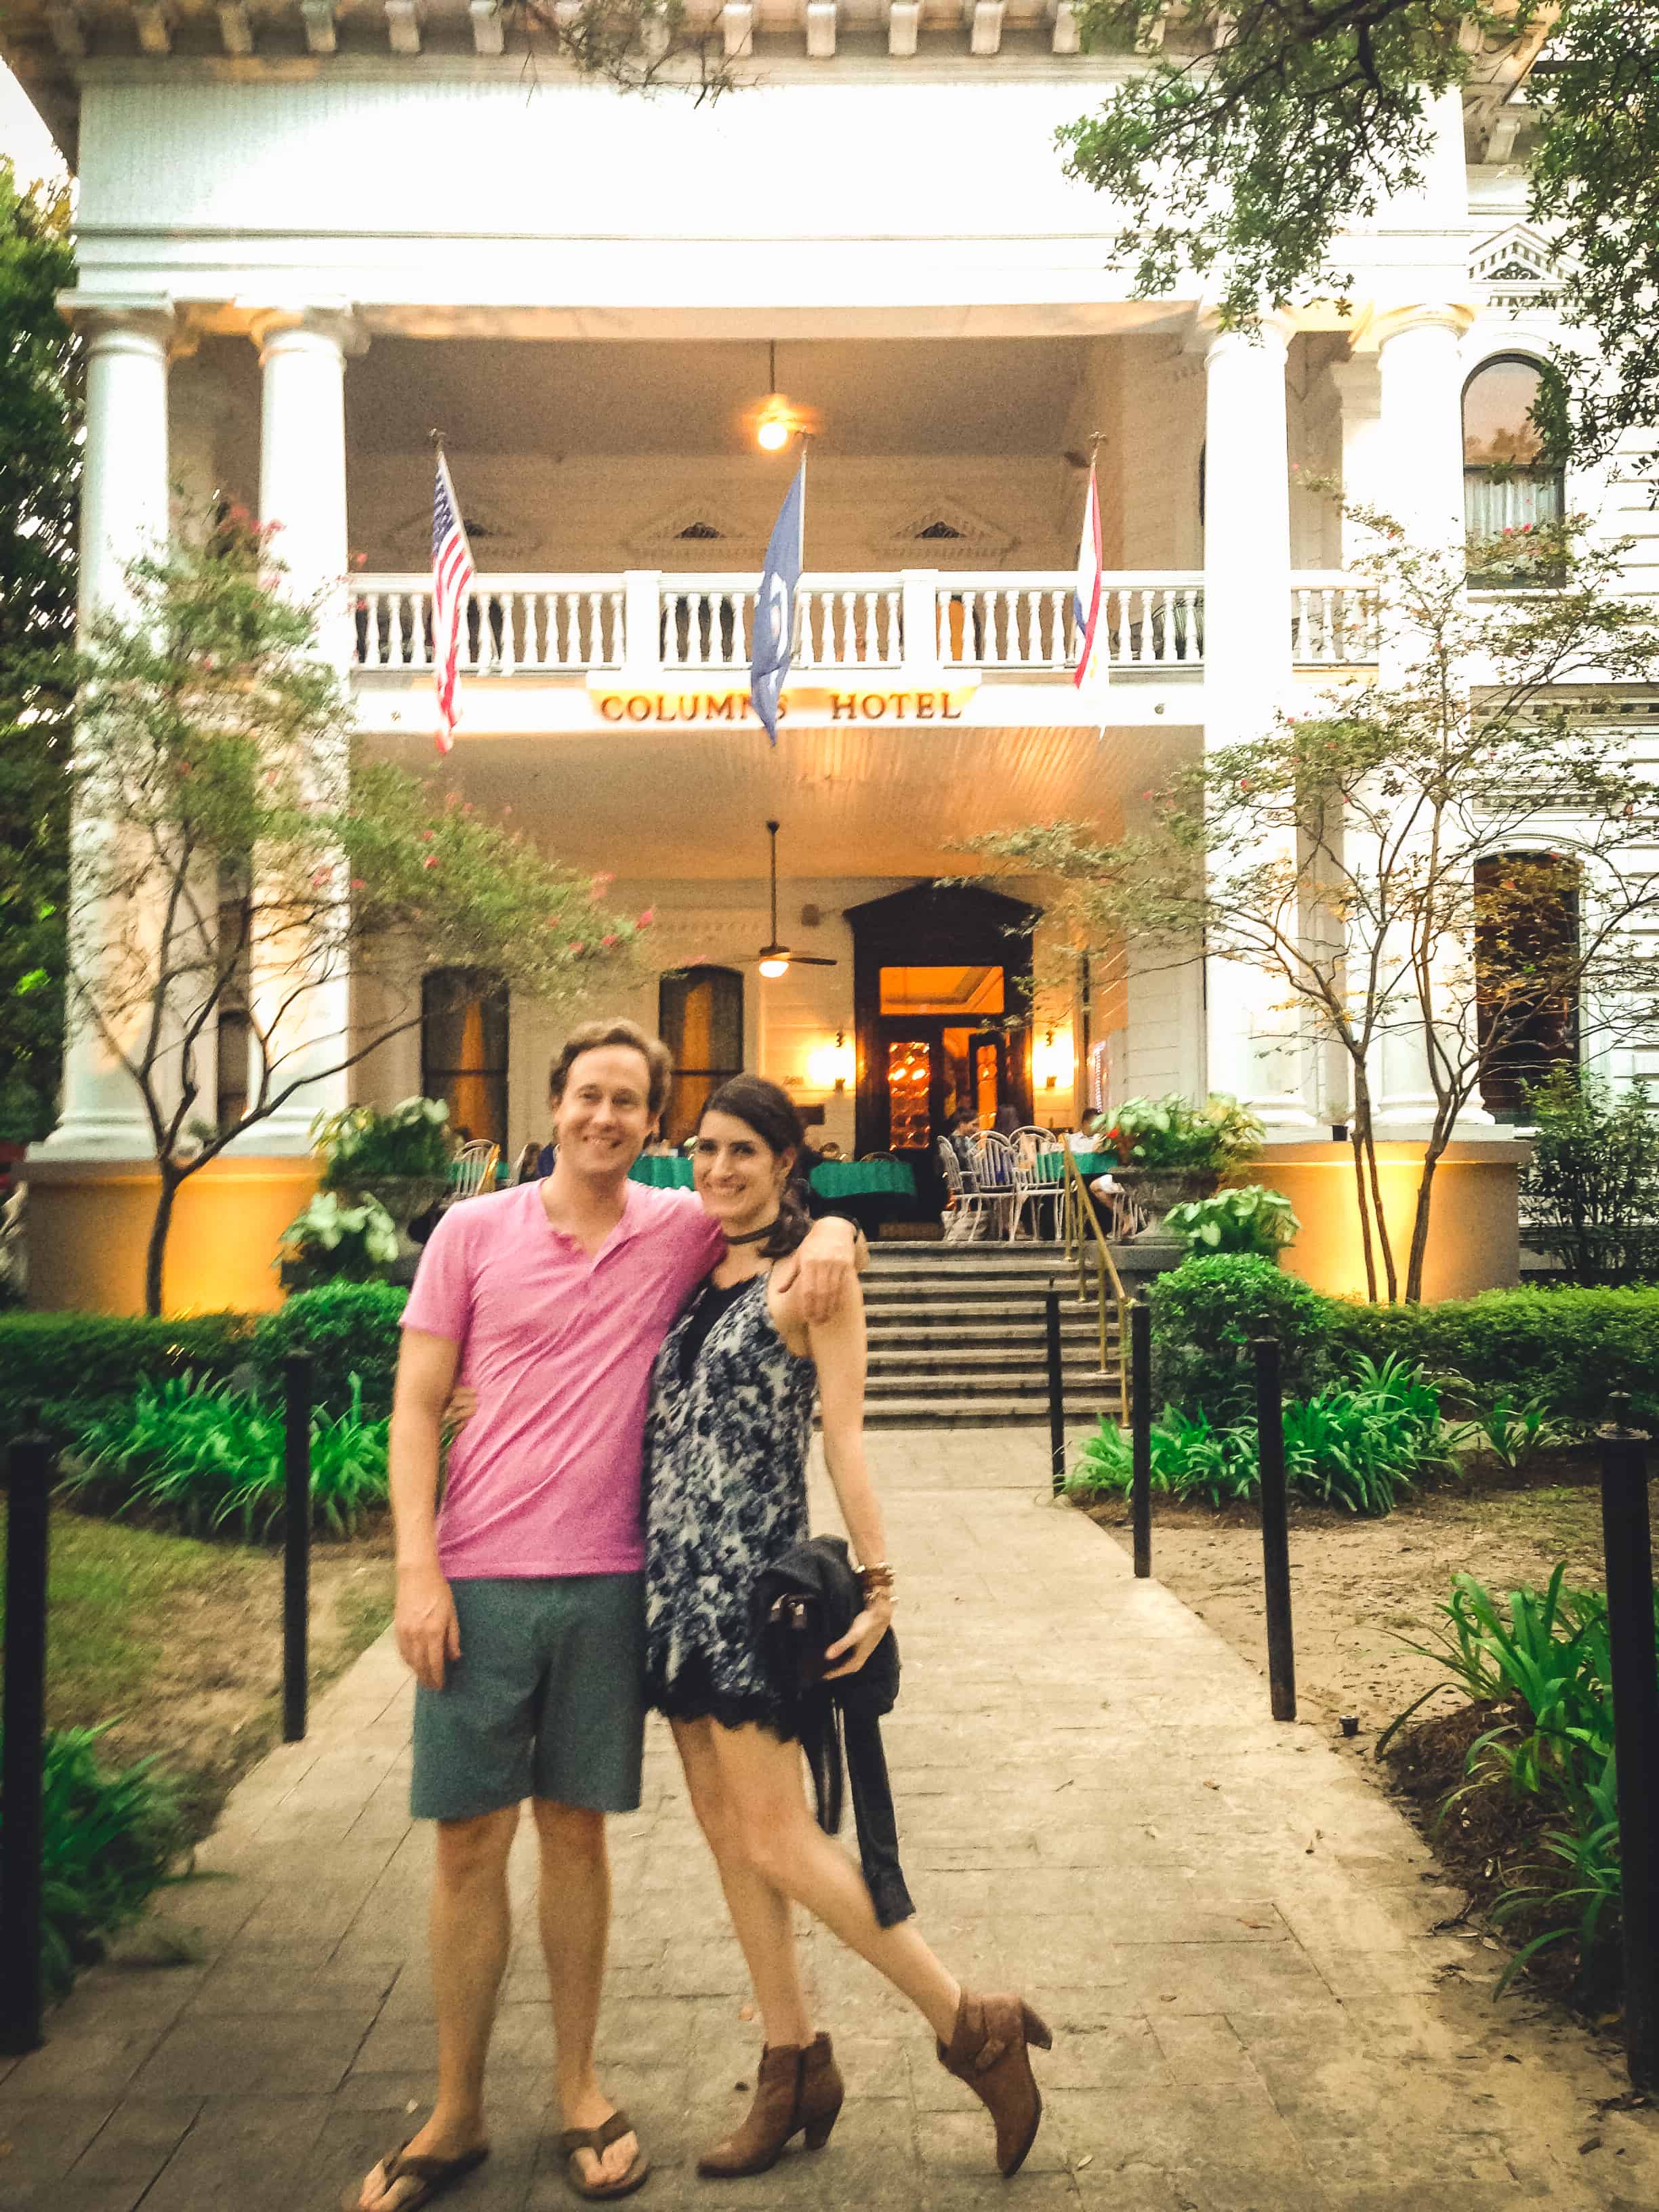 Best things to do in New Orleans Louisiana Andrew Kerr The Columns Hotel